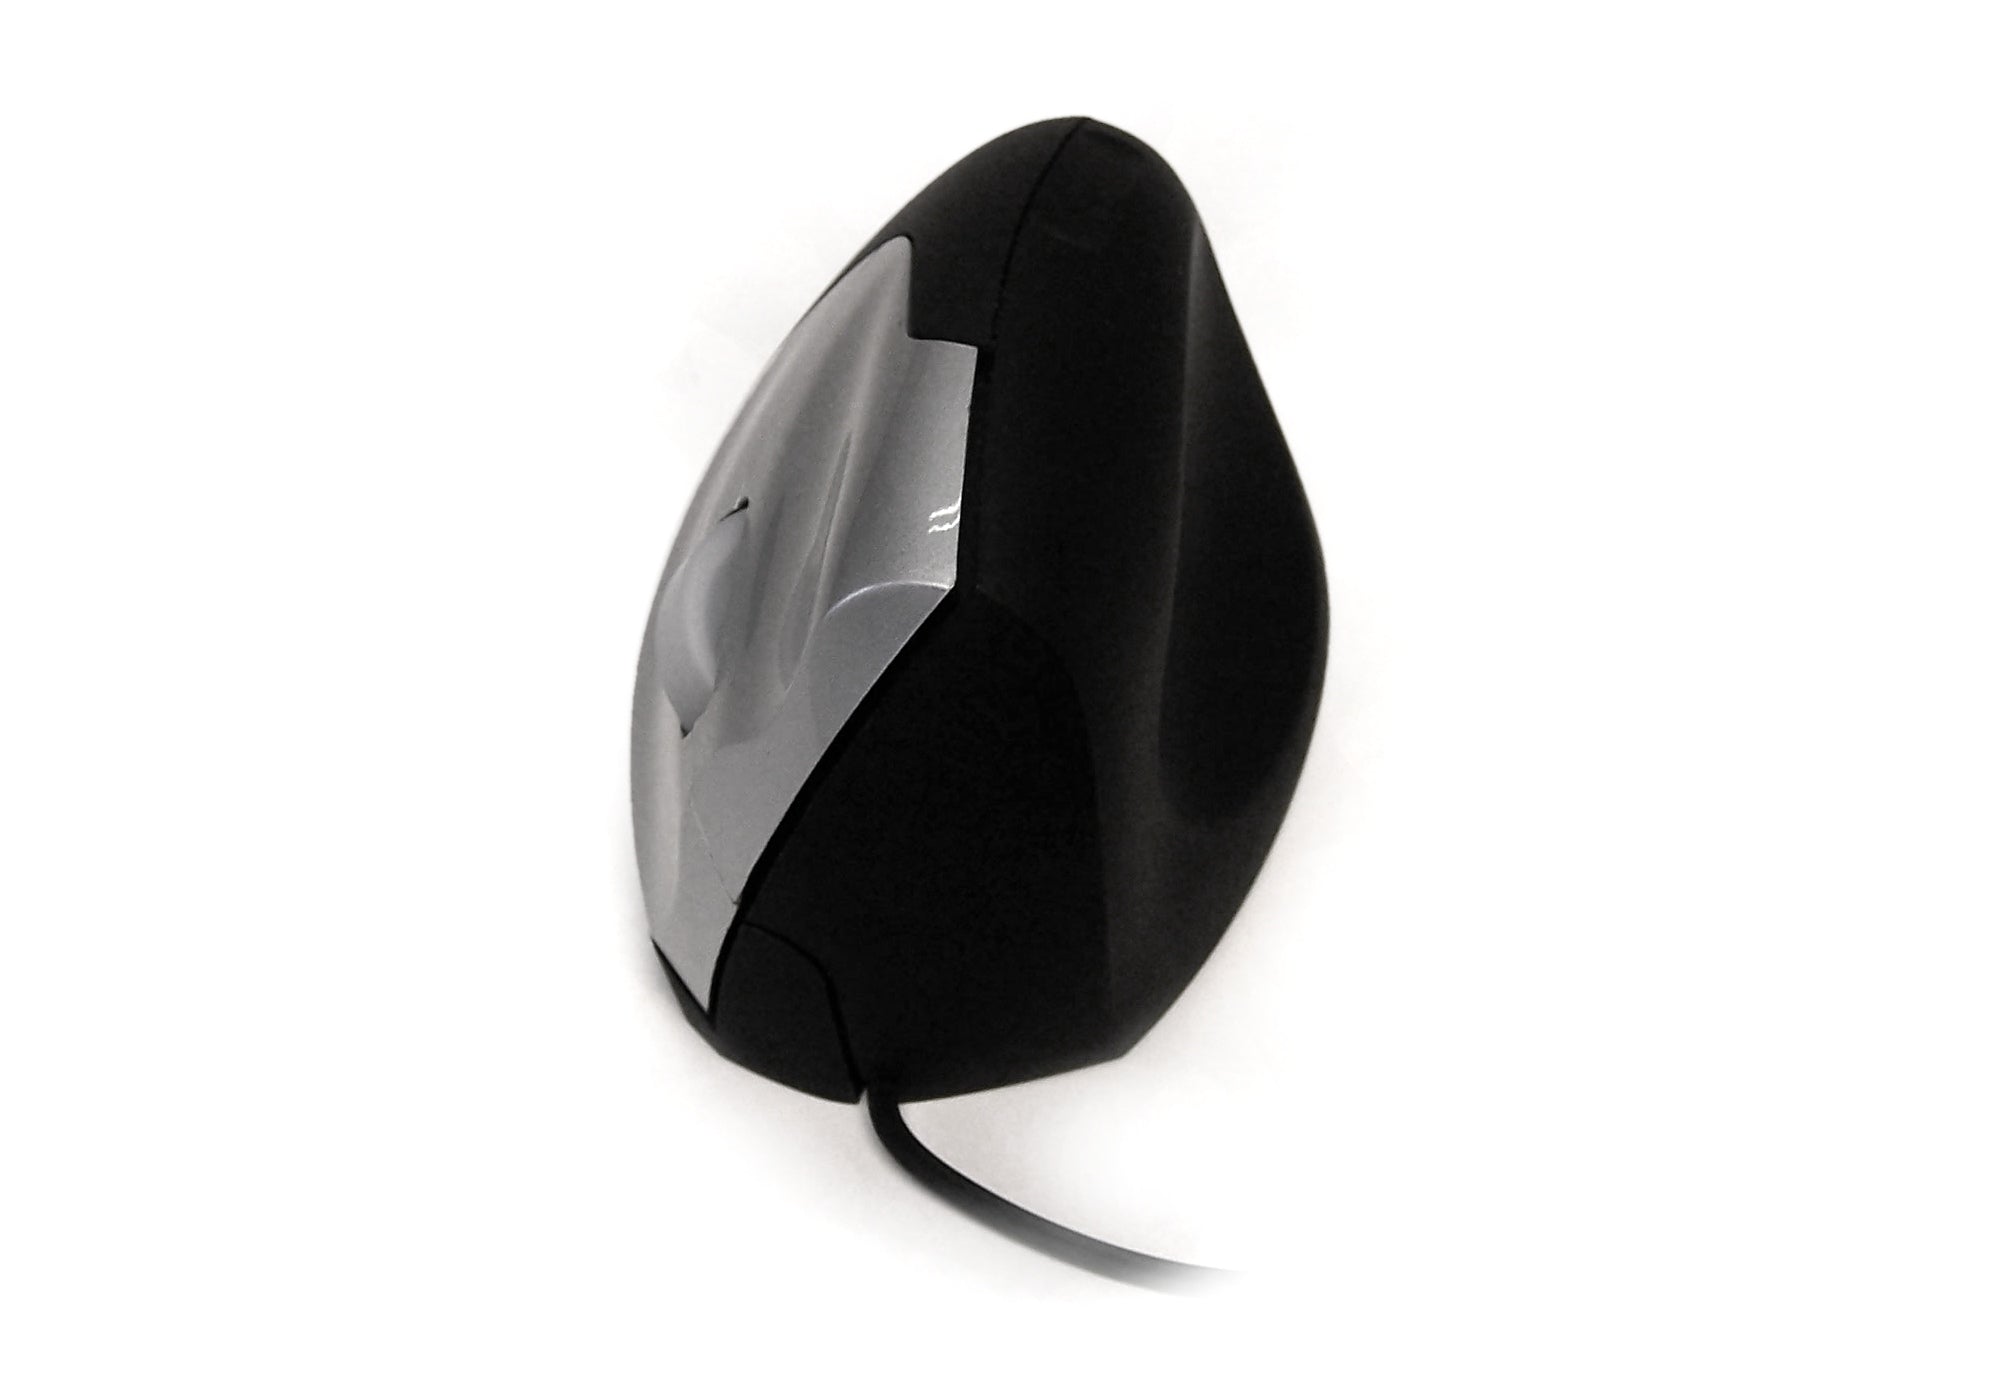 Accuratus Upright 2 - USB Upright Vertical Mouse to Help Prevent RSI